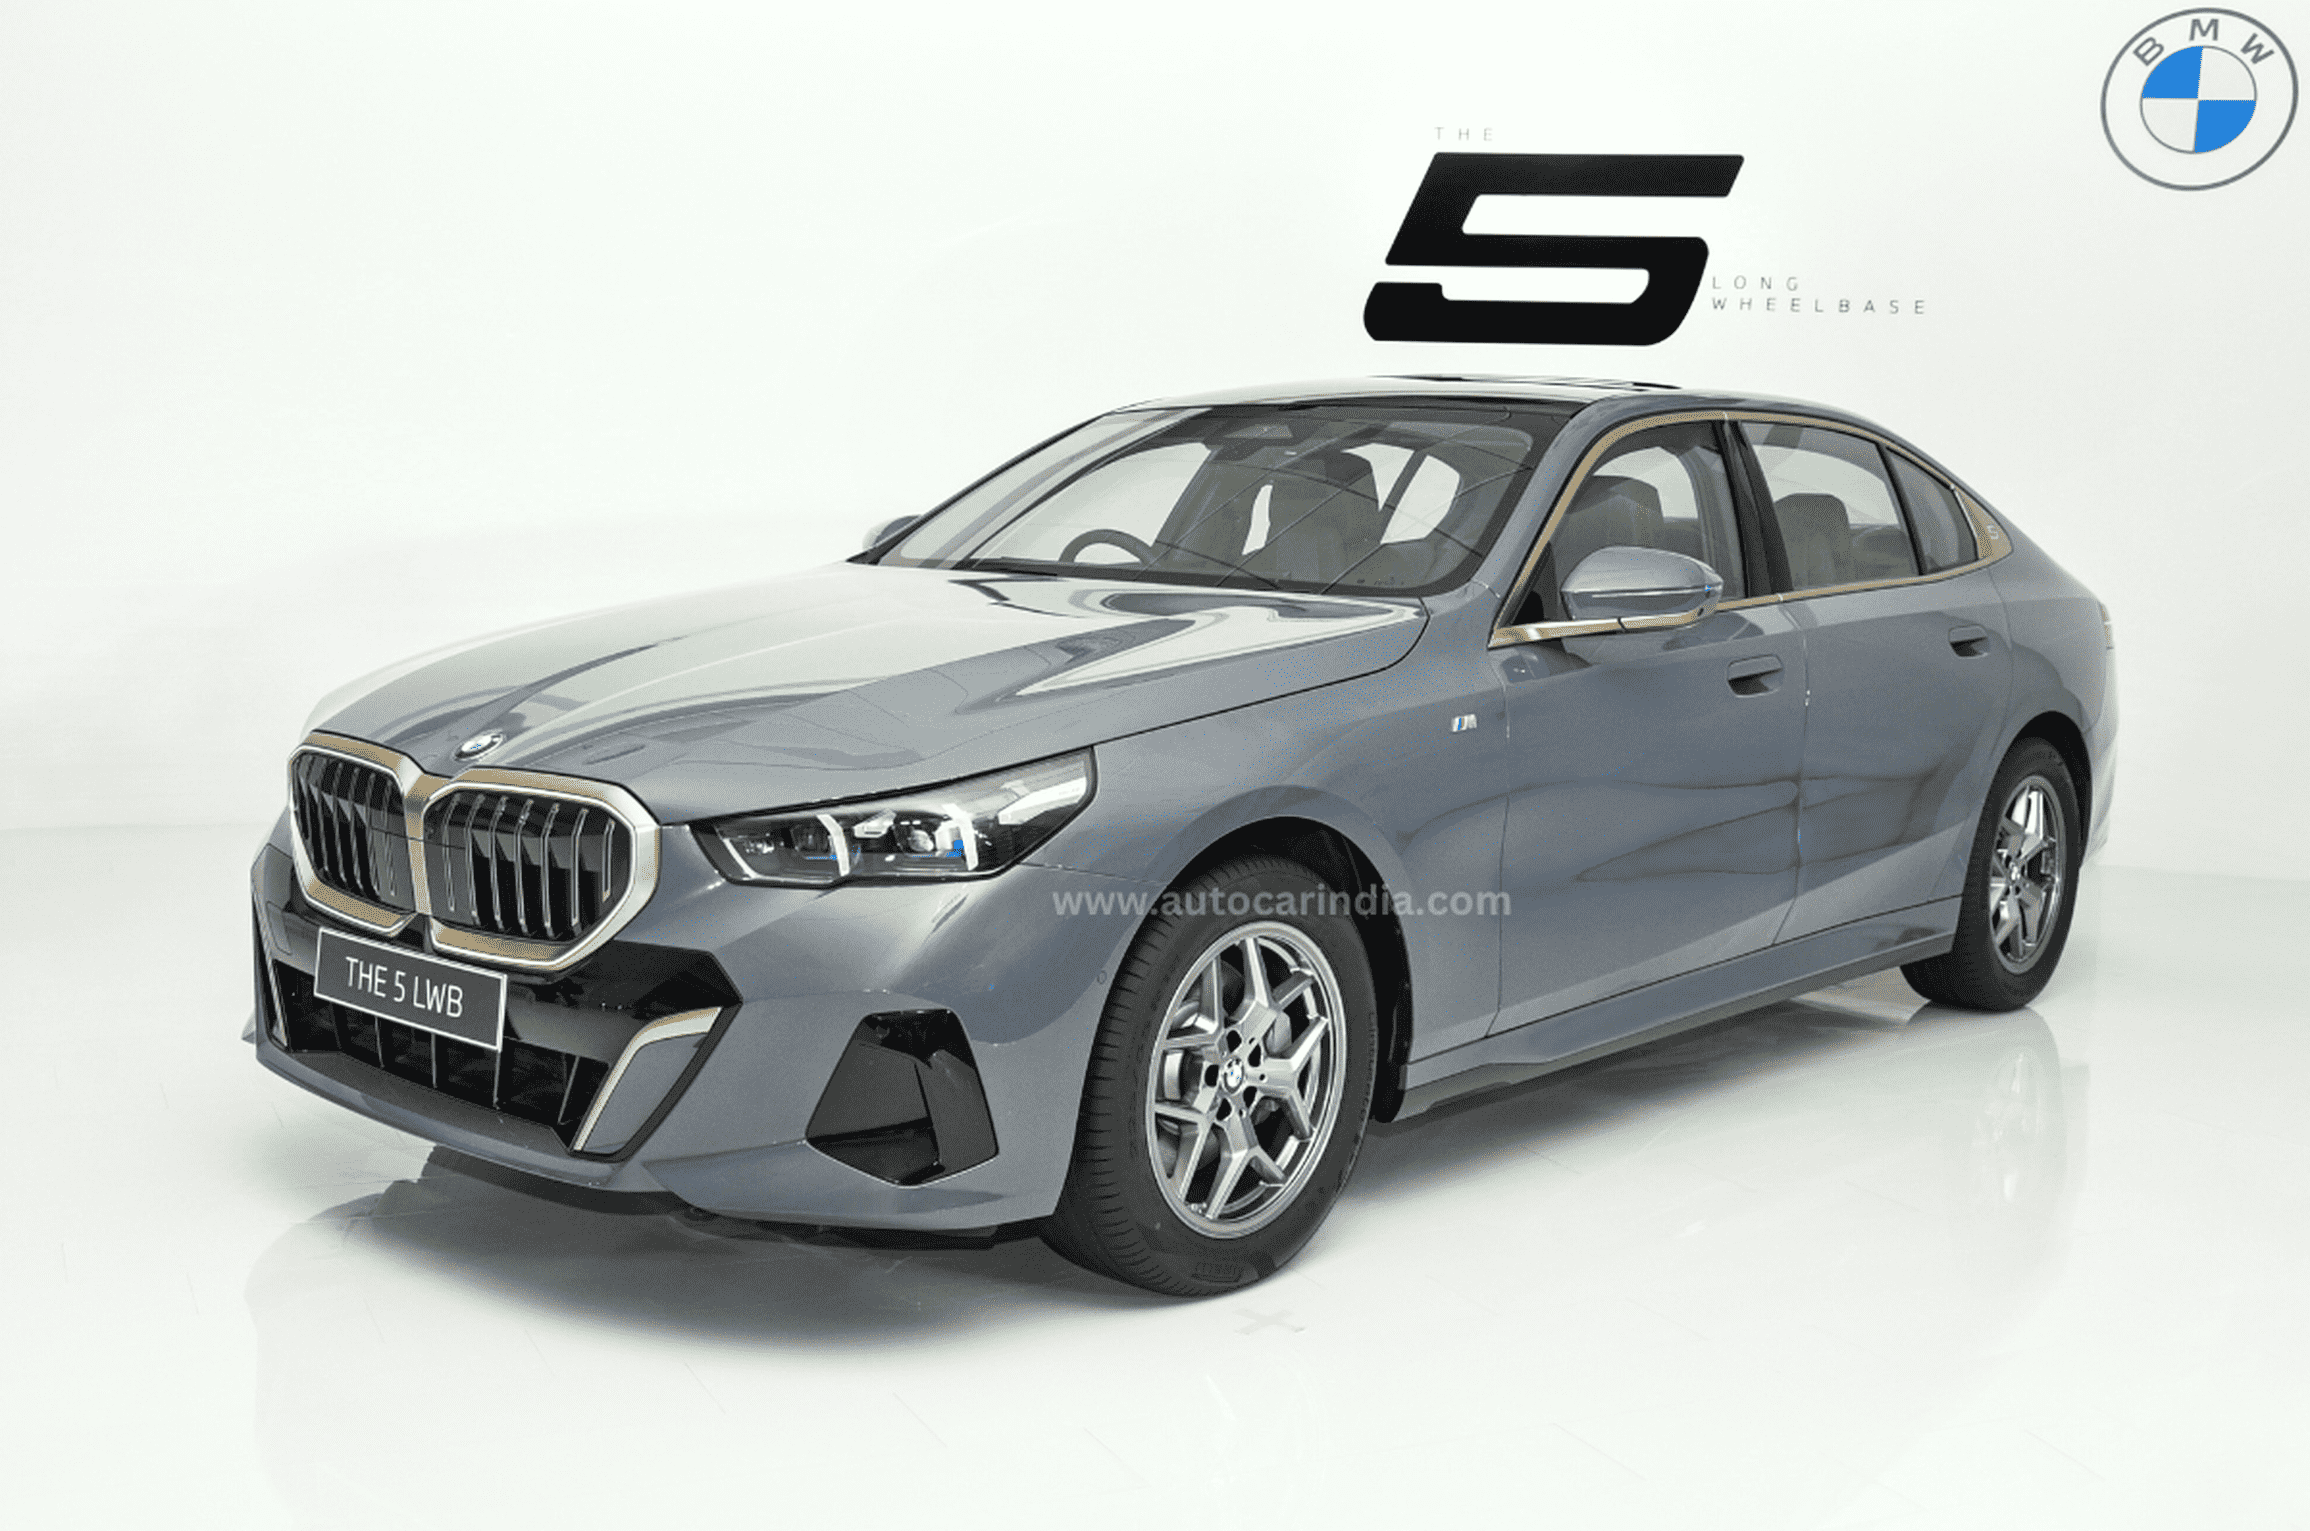 BMW 5- Series LWB will be available in a single 530Li M Sport version only.  